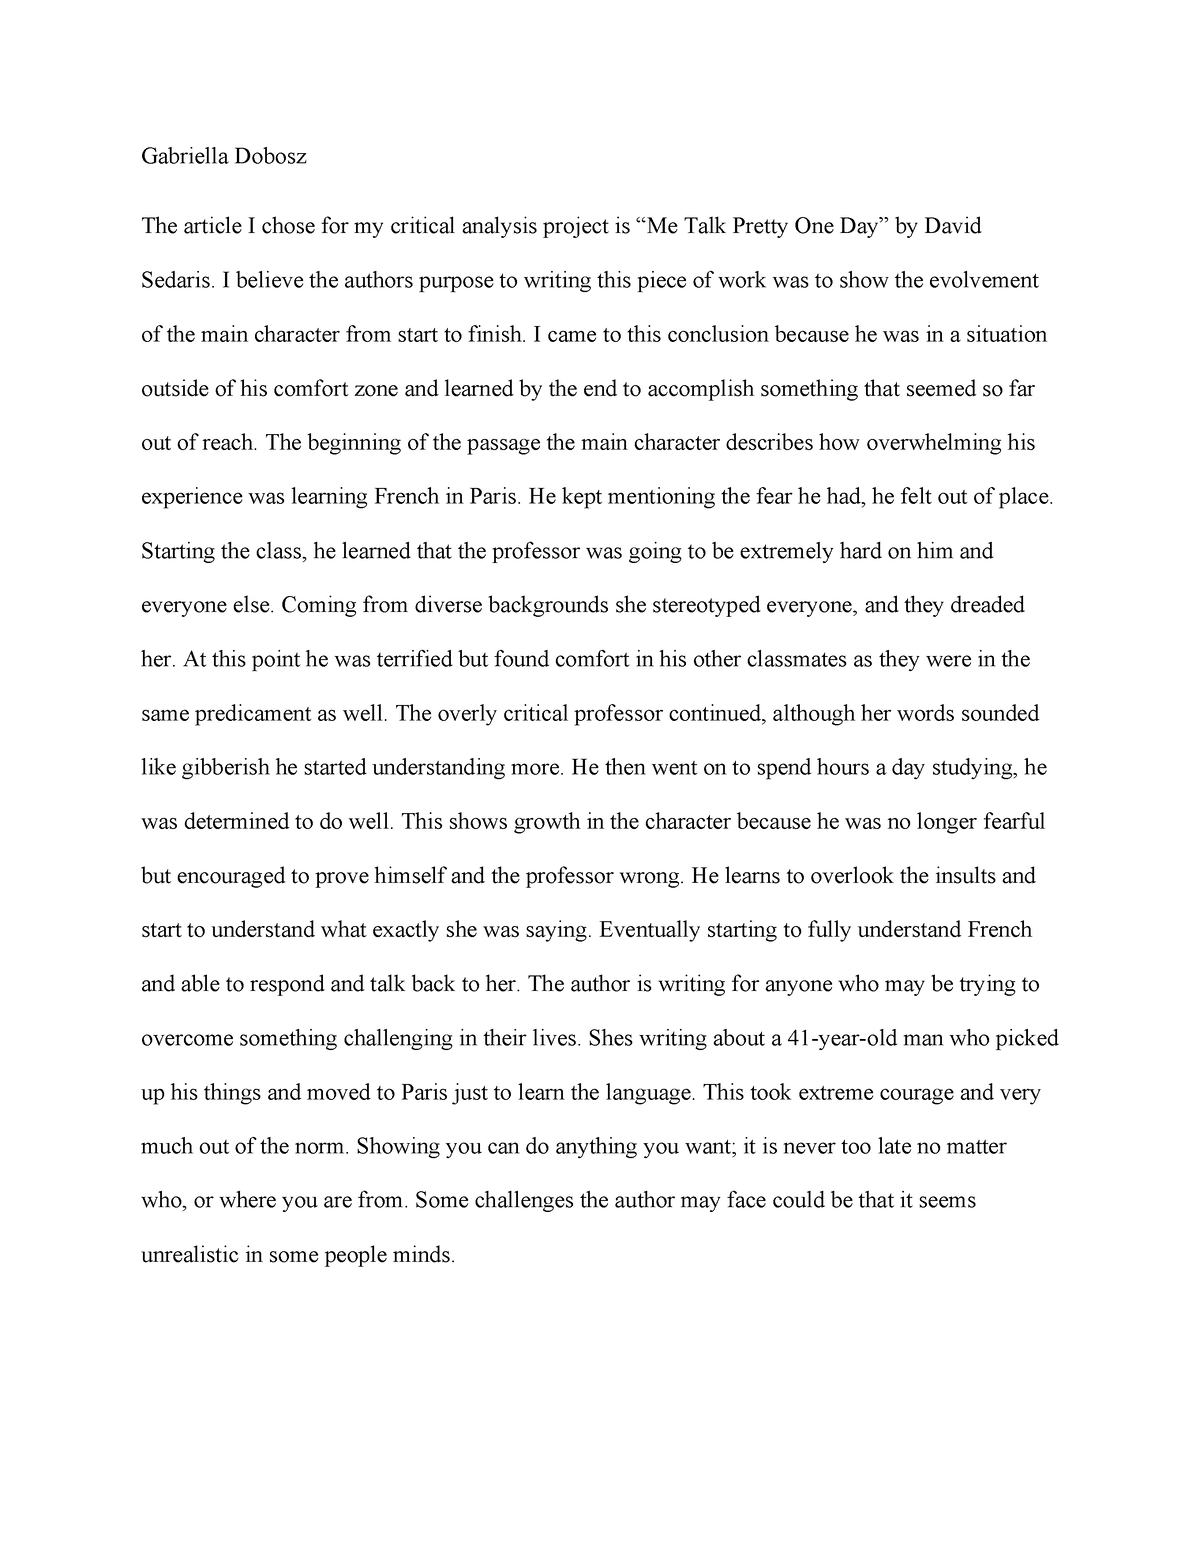 1-7 writing notes comp 1 - Gabriella Dobosz The article I chose for my ...